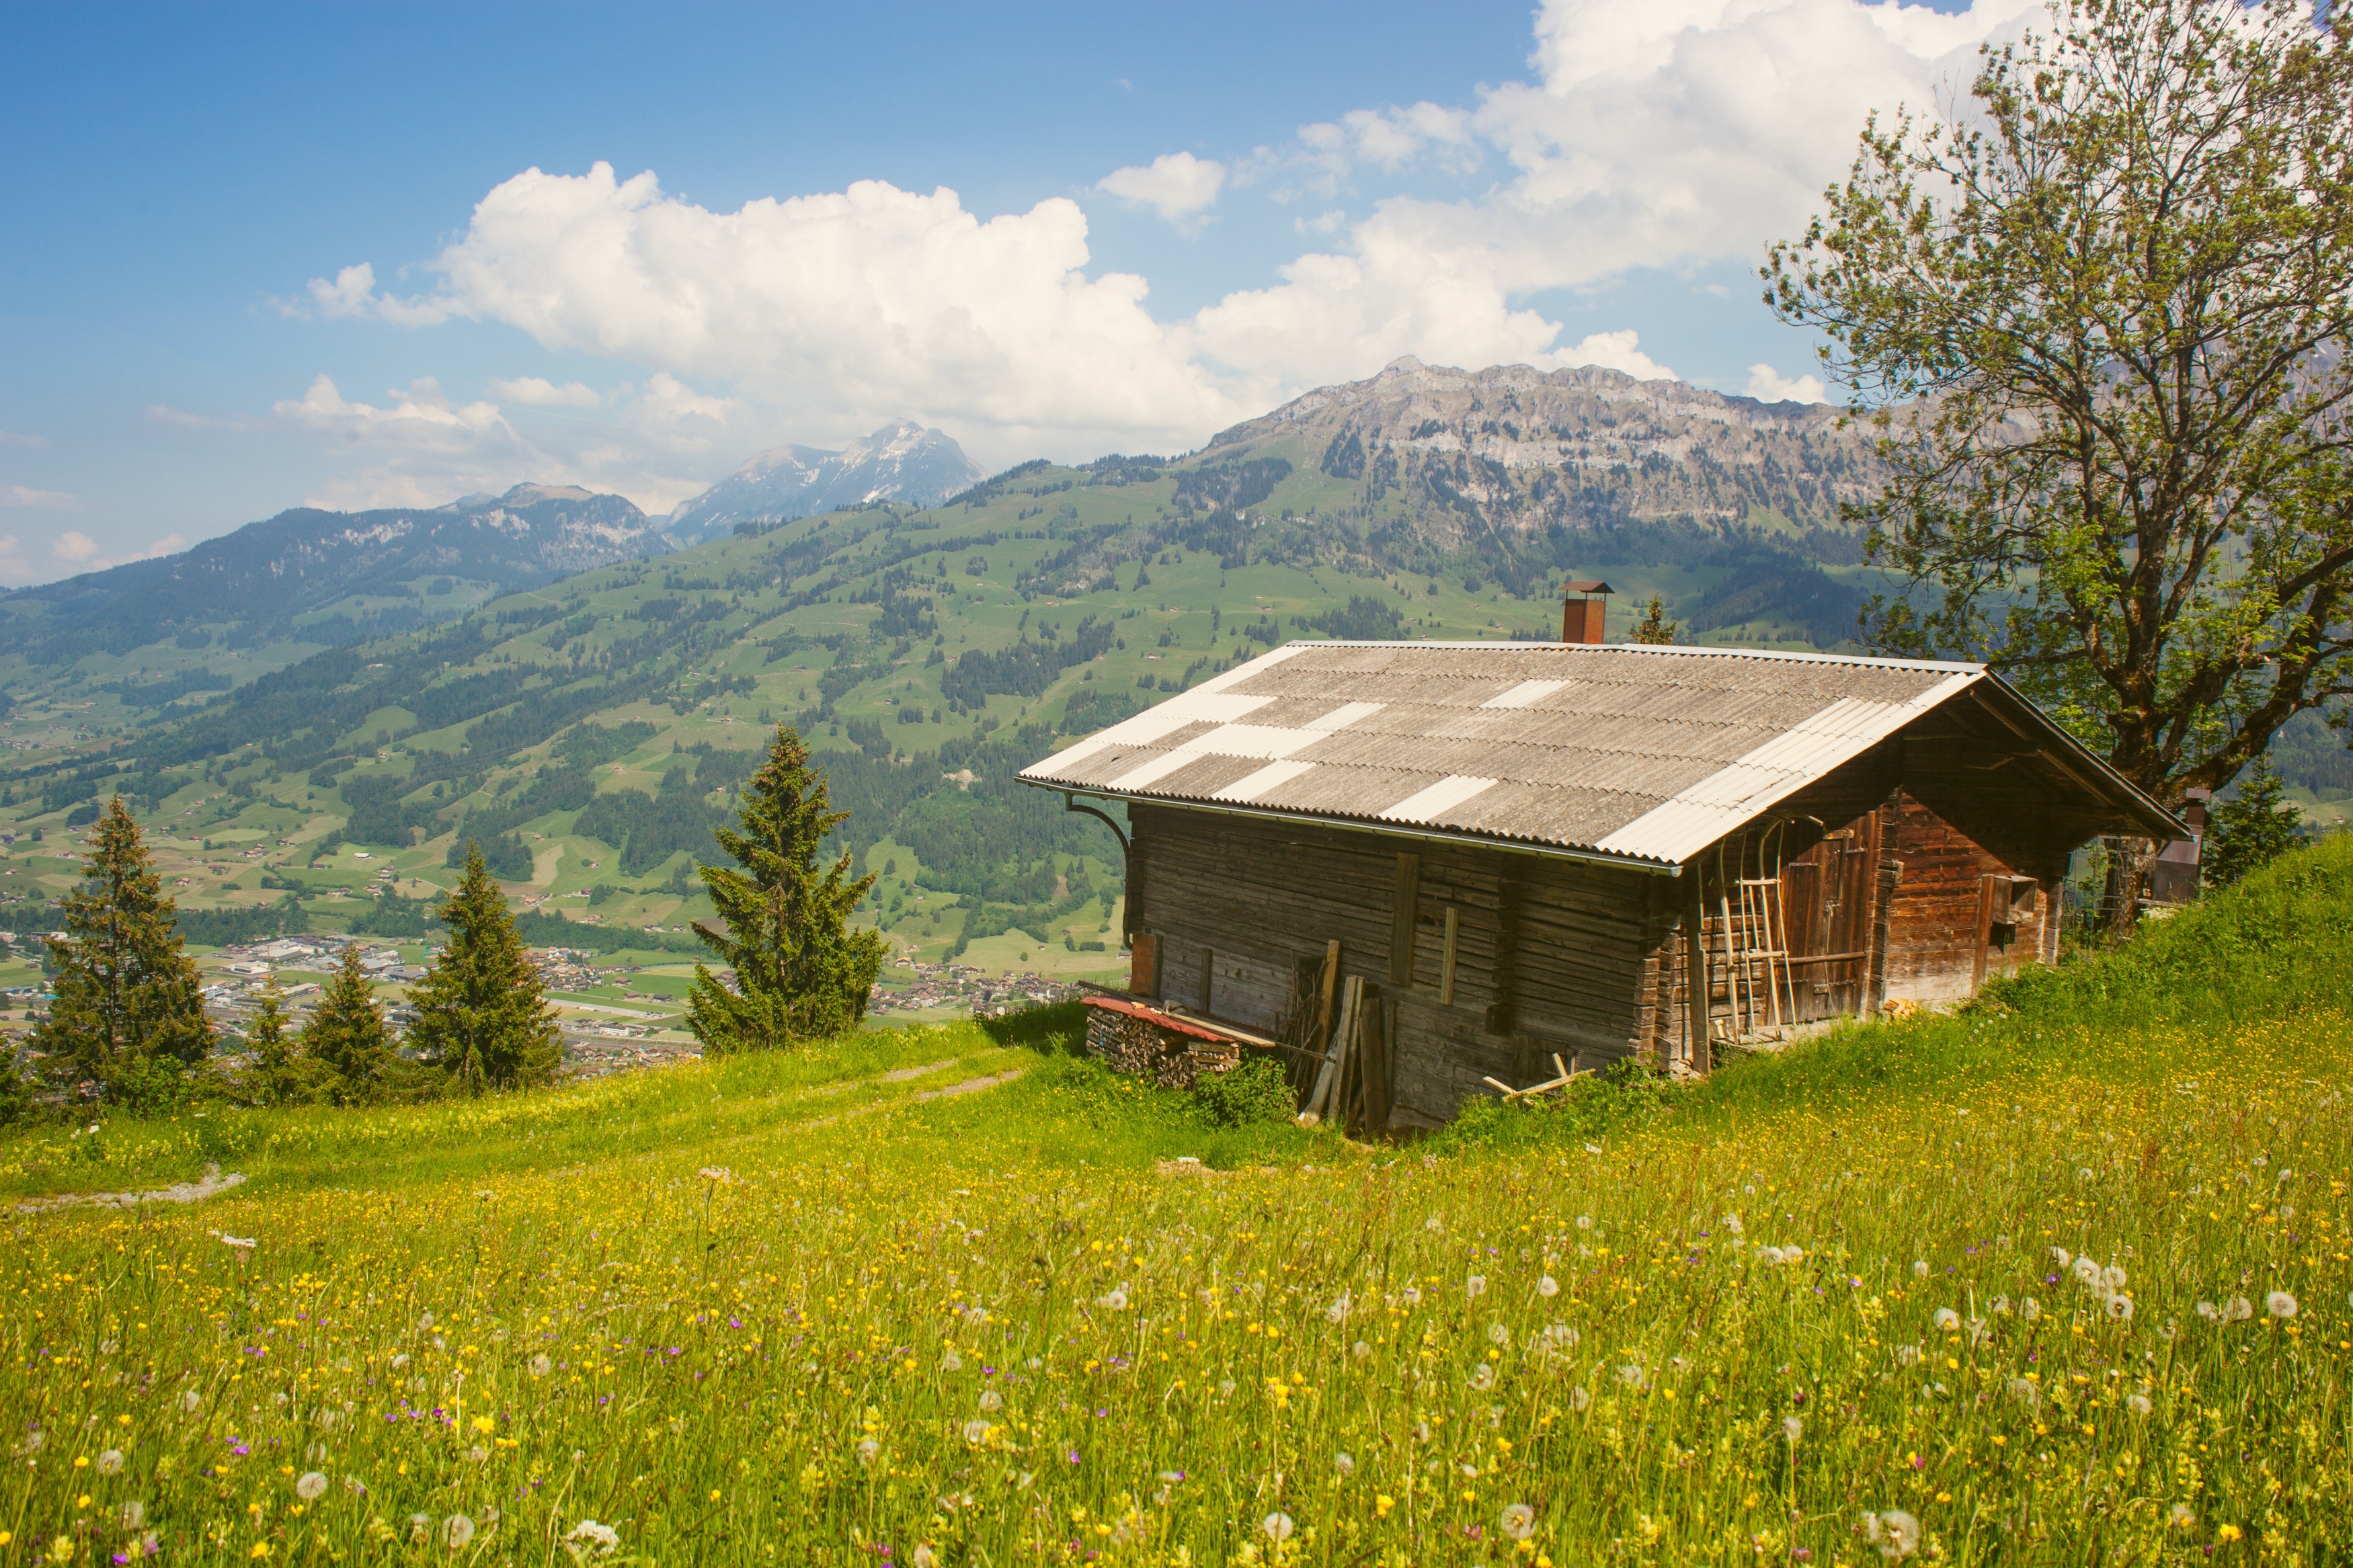 An abandoned cabin in a field with mountains in the background